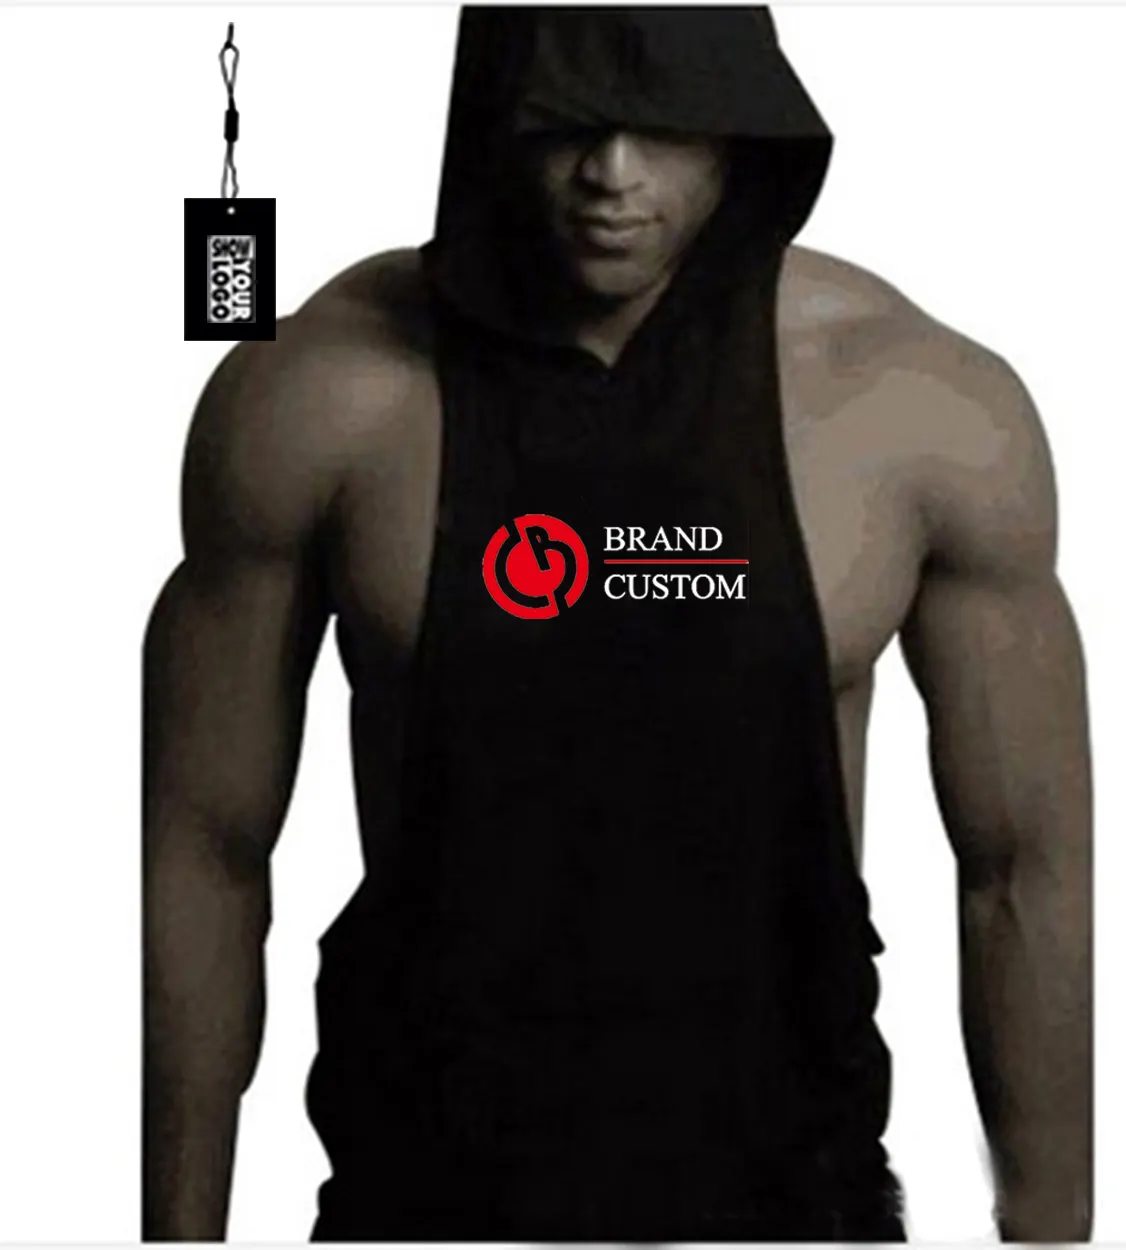 Custom Cotton Summer Bodybuilding Muscle Fitness Hooded Vest Training Tank Top Outdoor-fit Gym Shirt for Men with Free labels